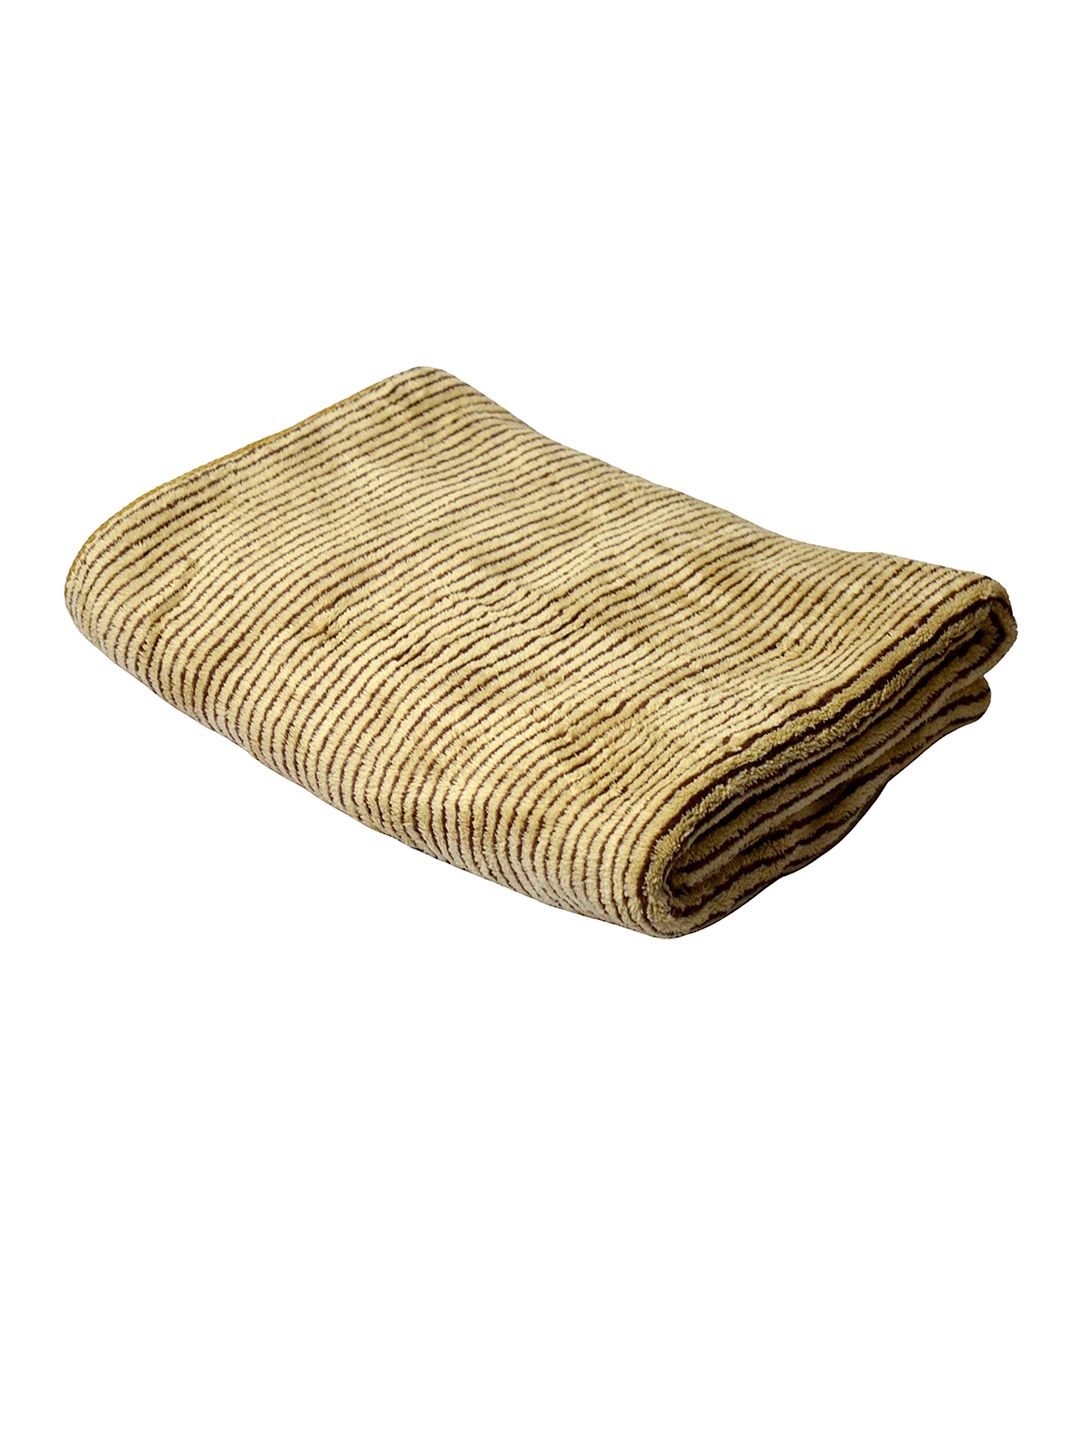 Tranquil square Brown Striped 650 GSM Cotton Bath Towel Price in India